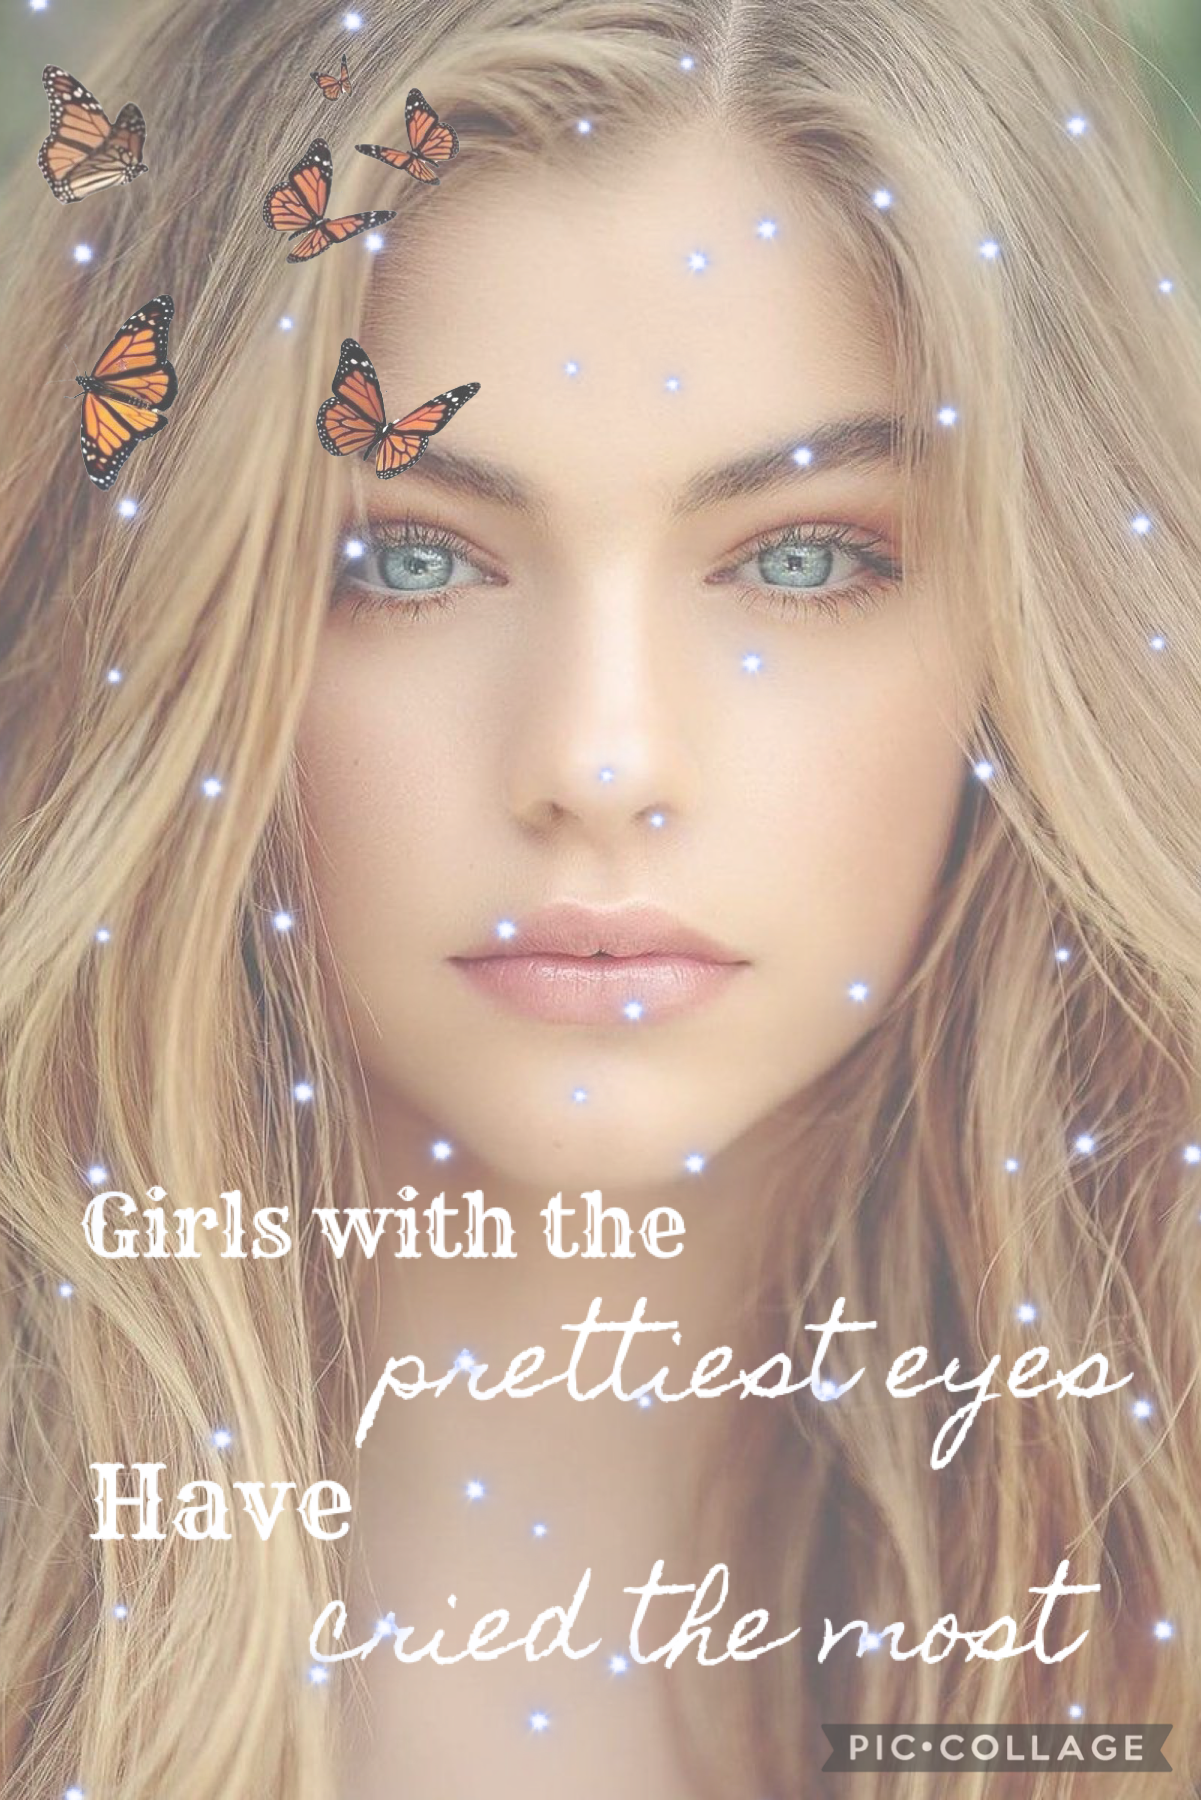 Girls with the prettiest eyes, have cried the most 